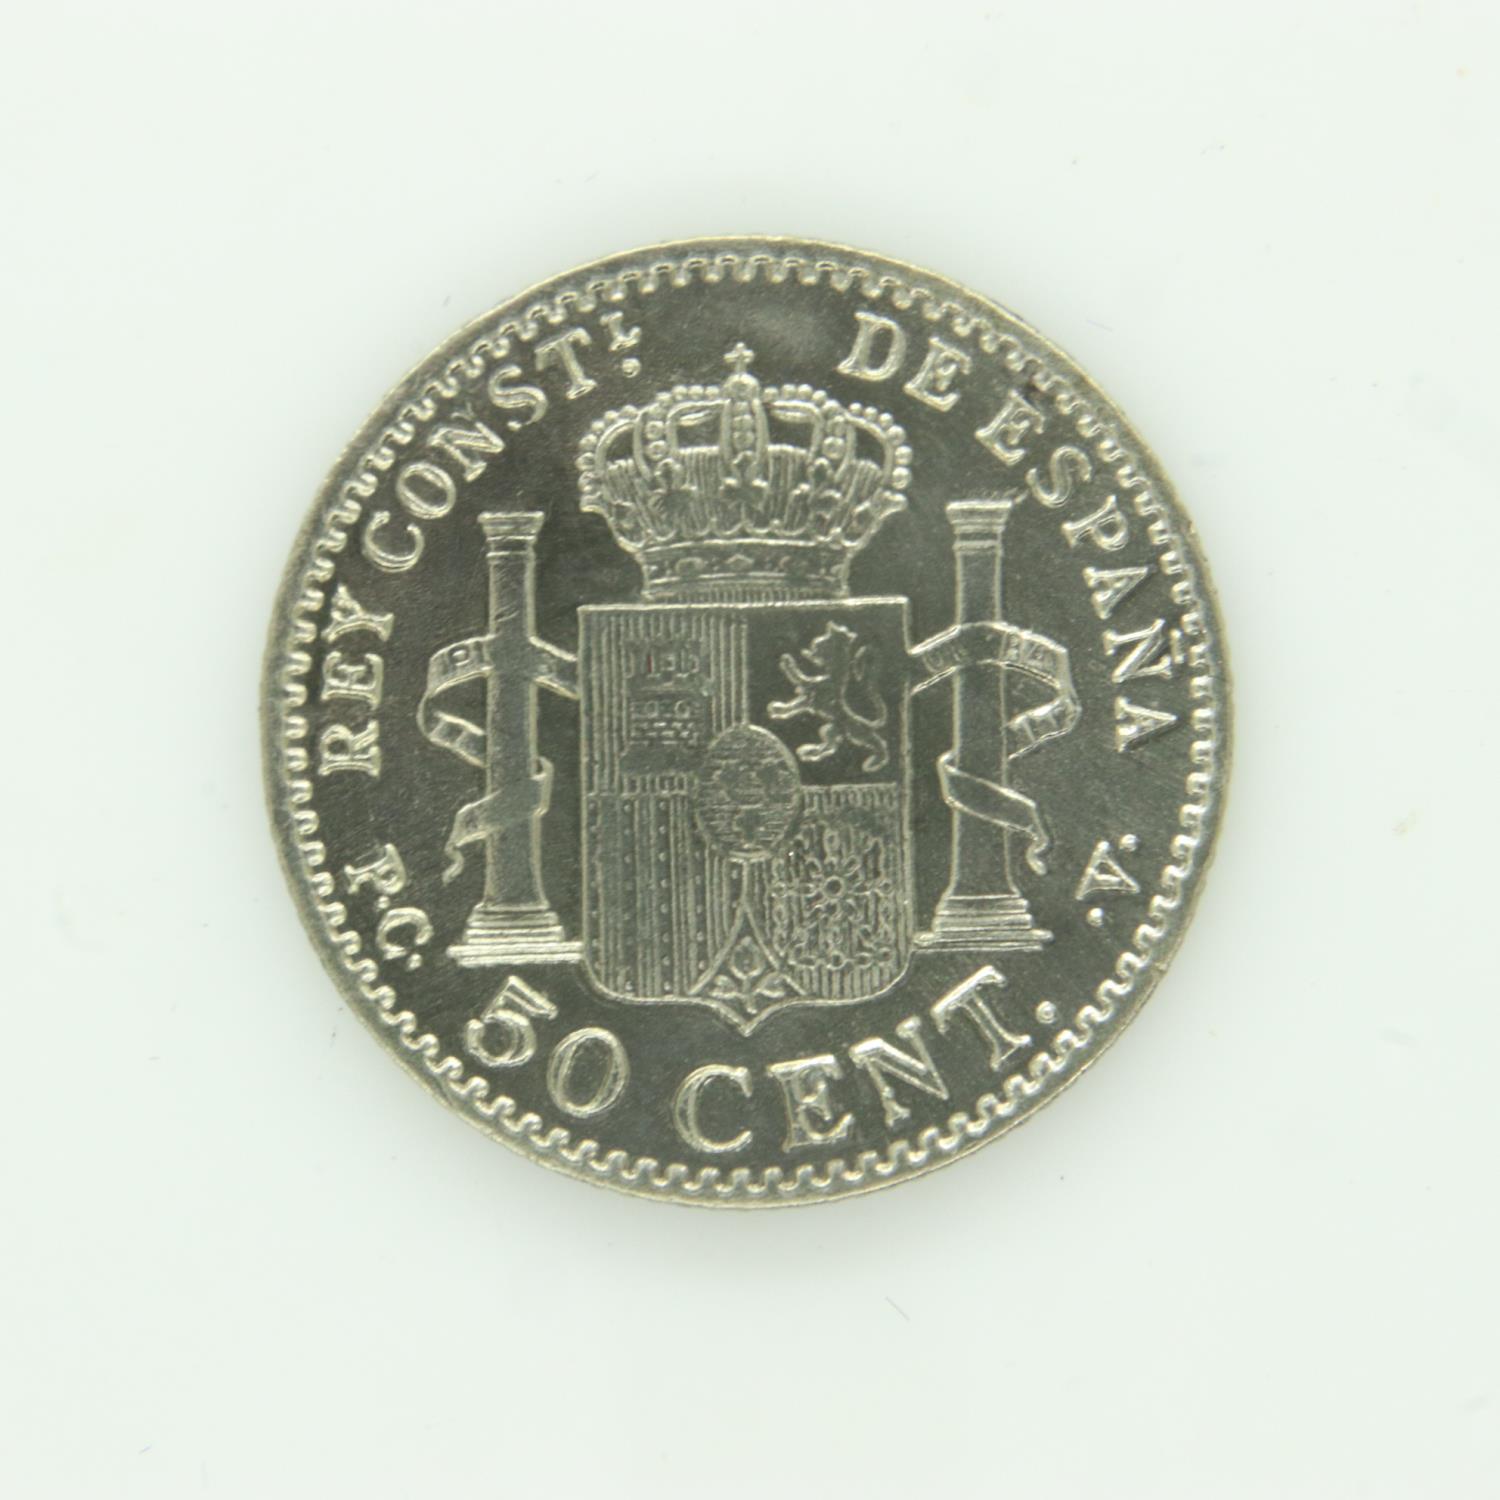 1904 Spanish silver 50 cents - EF grade. UK P&P Group 0 (£6+VAT for the first lot and £1+VAT for